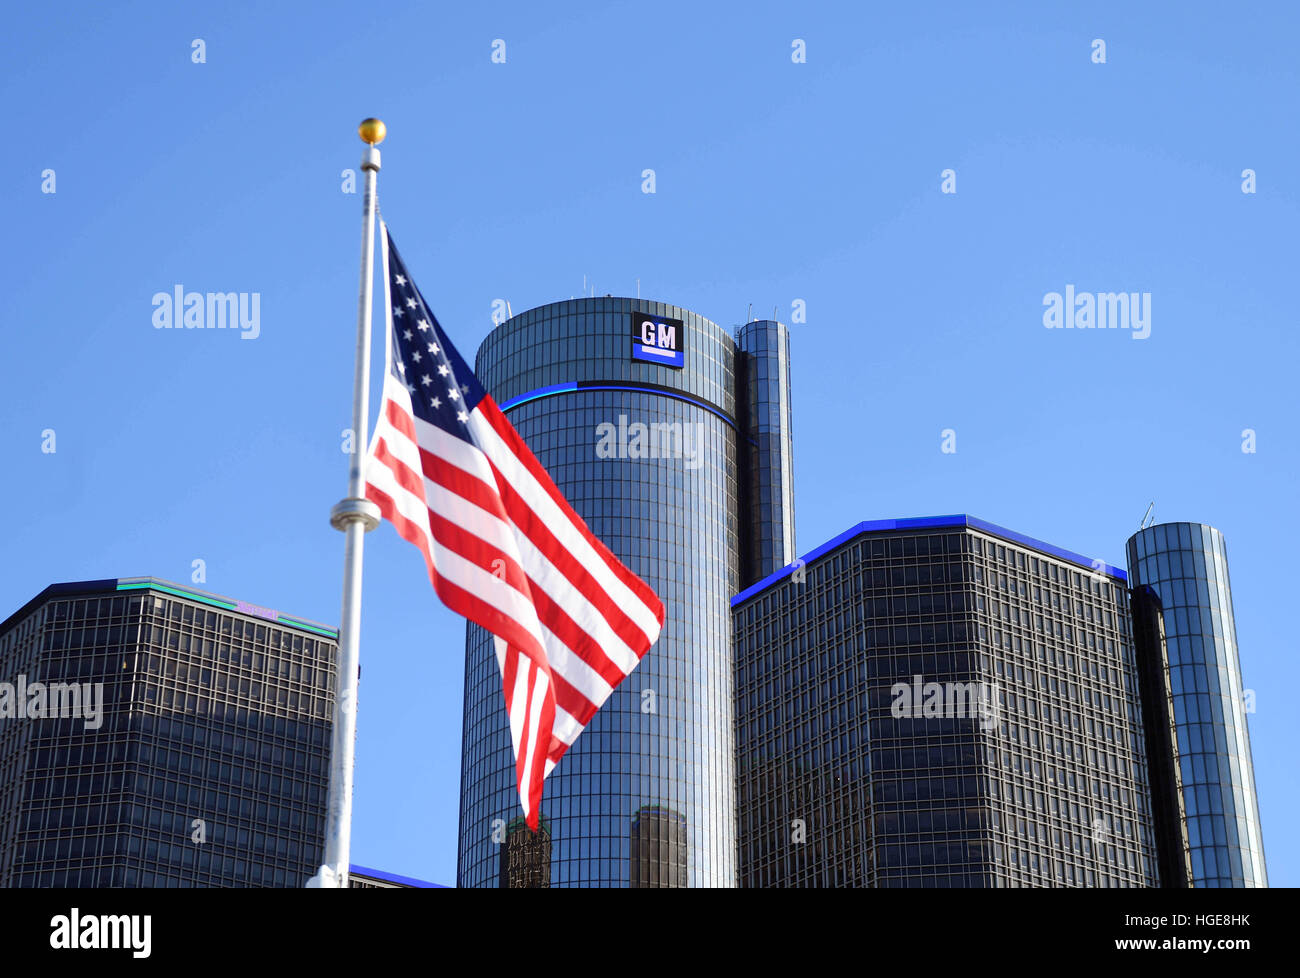 Detroit, Us. 08th Jan, 2017. The headquaters of US auto company General Motos (GM) in Detroit, Michigan, United States, as seen on 08 January 2017. In front an American flag can be seen. The North American International Auto Show (NAIAS) will start 09 January 2017. At first its doors will open only for the press and dealers, and then from 14 January until 22 January, it will also open for private visitors. Photo: Uli Deck/dpa/Alamy Live News Stock Photo